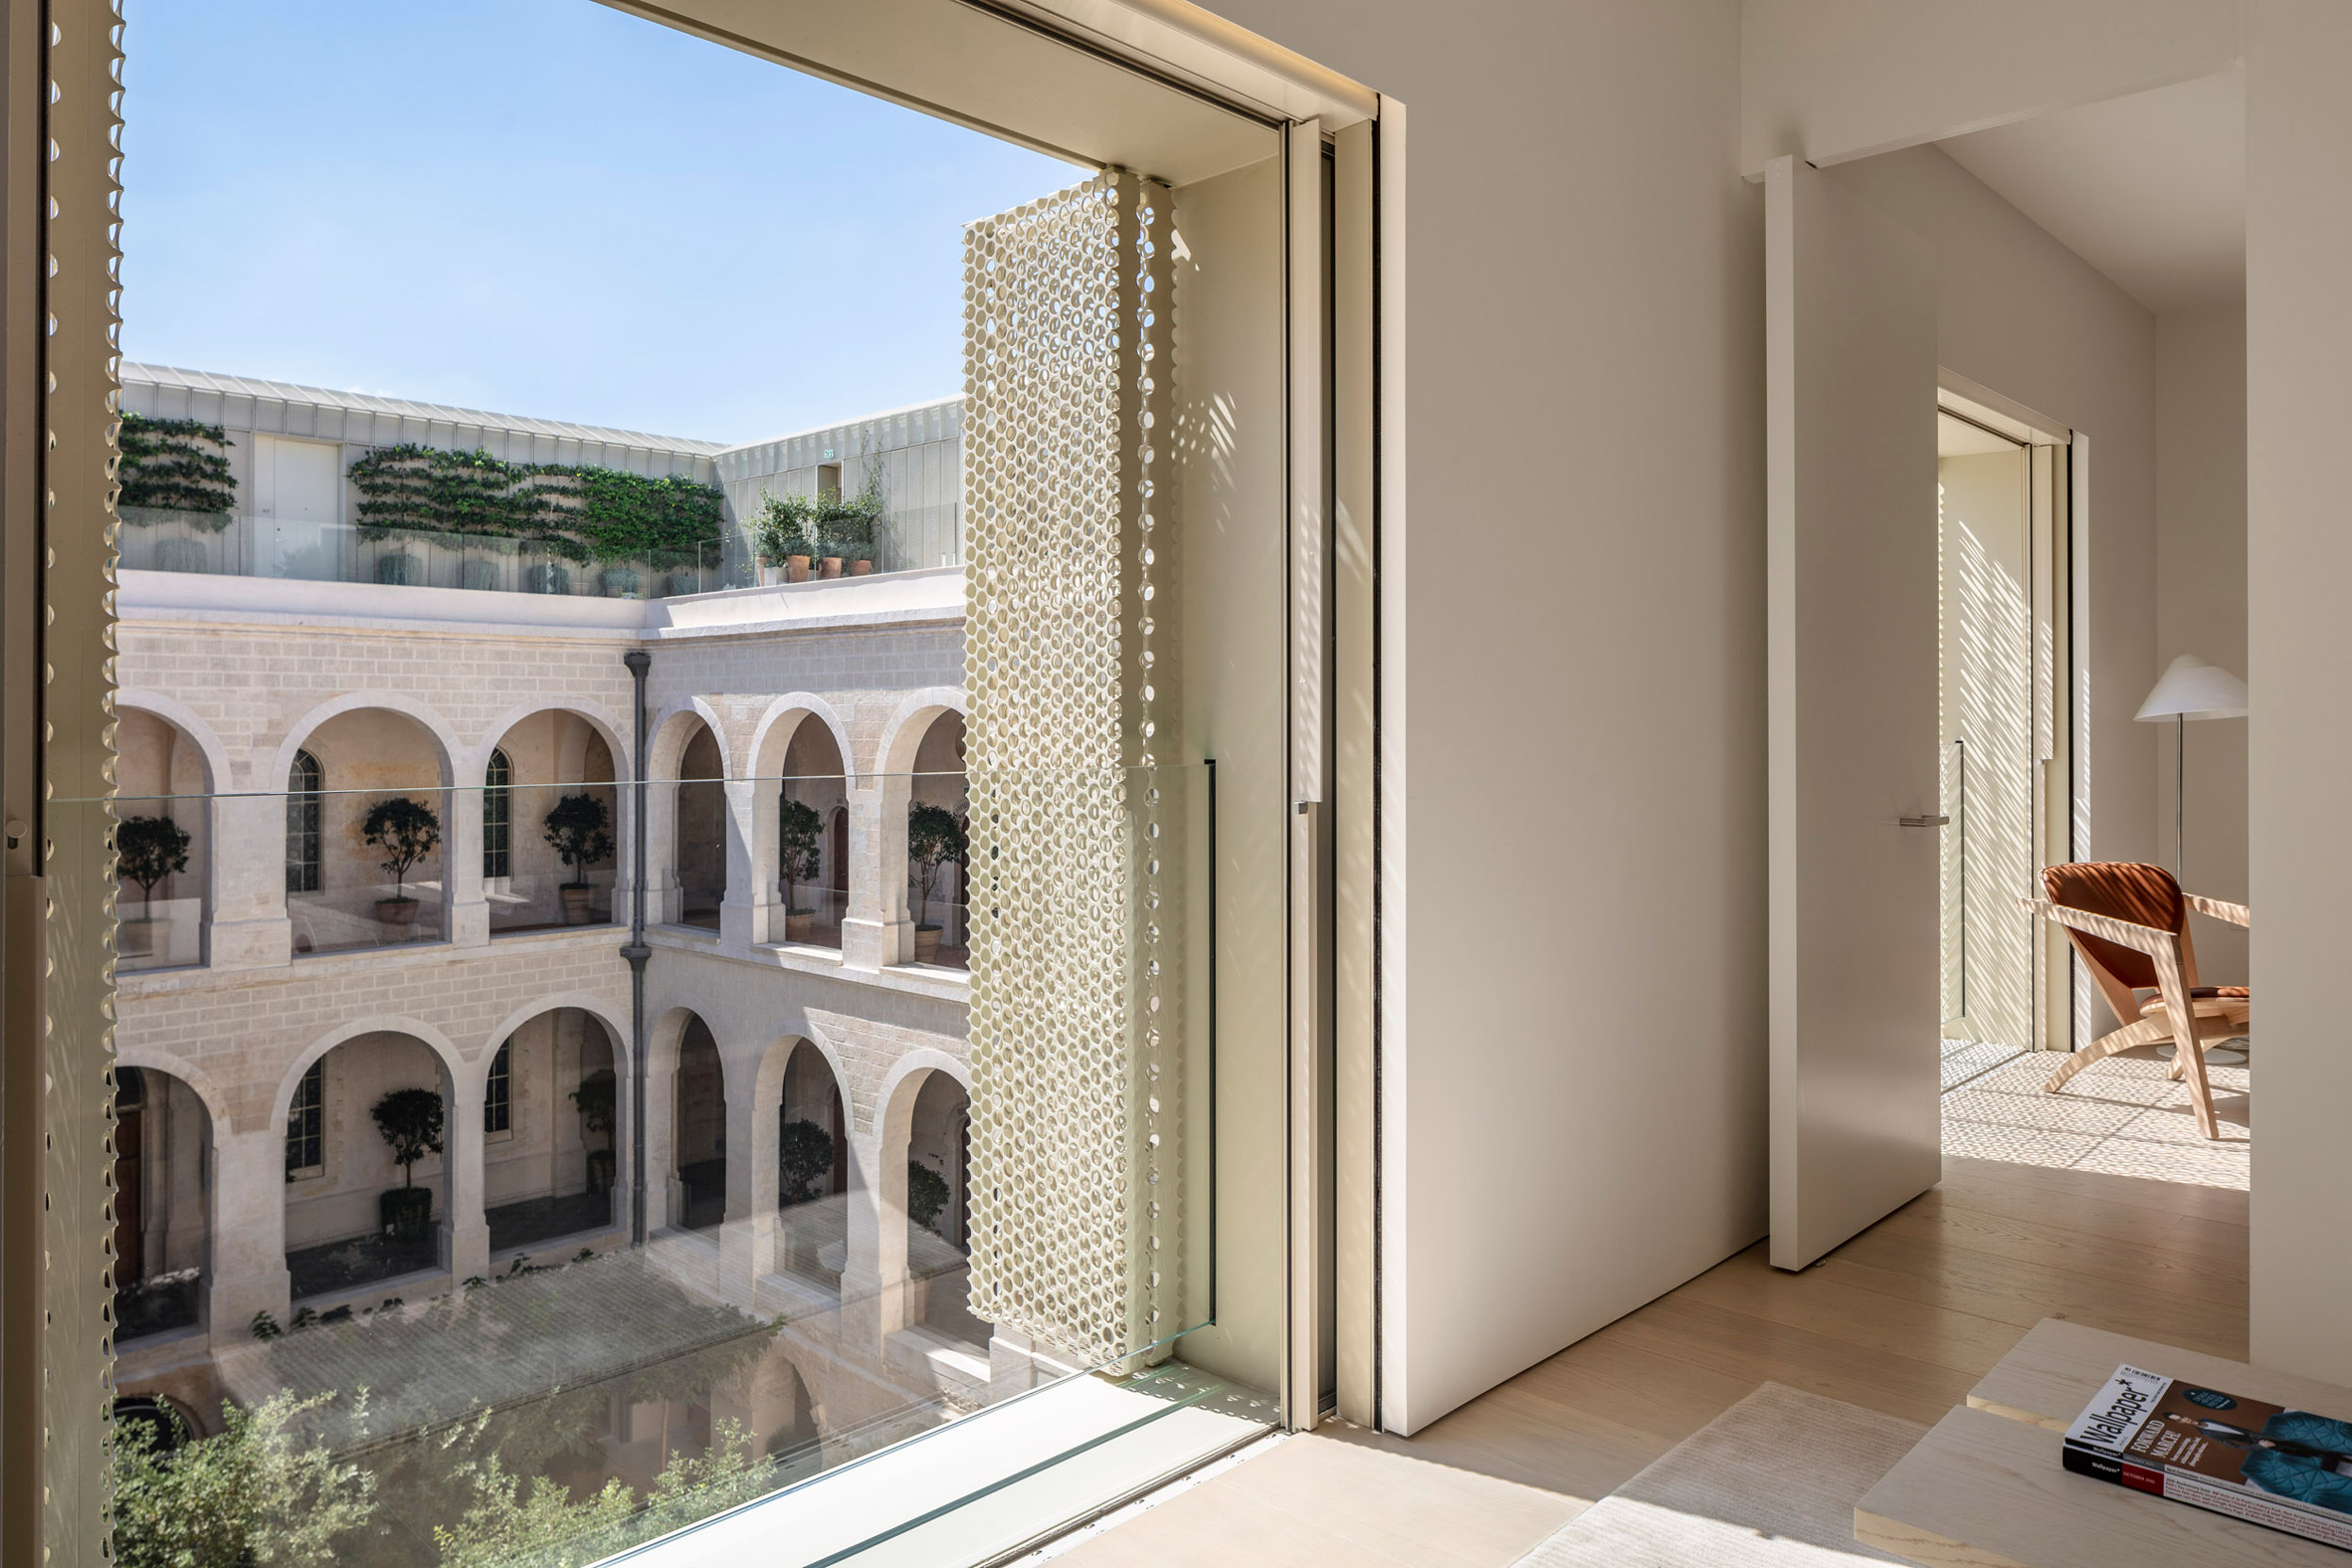 John Pawson Designs Private Residences At The Jaffa Hotel In Israel Wedesignspace 